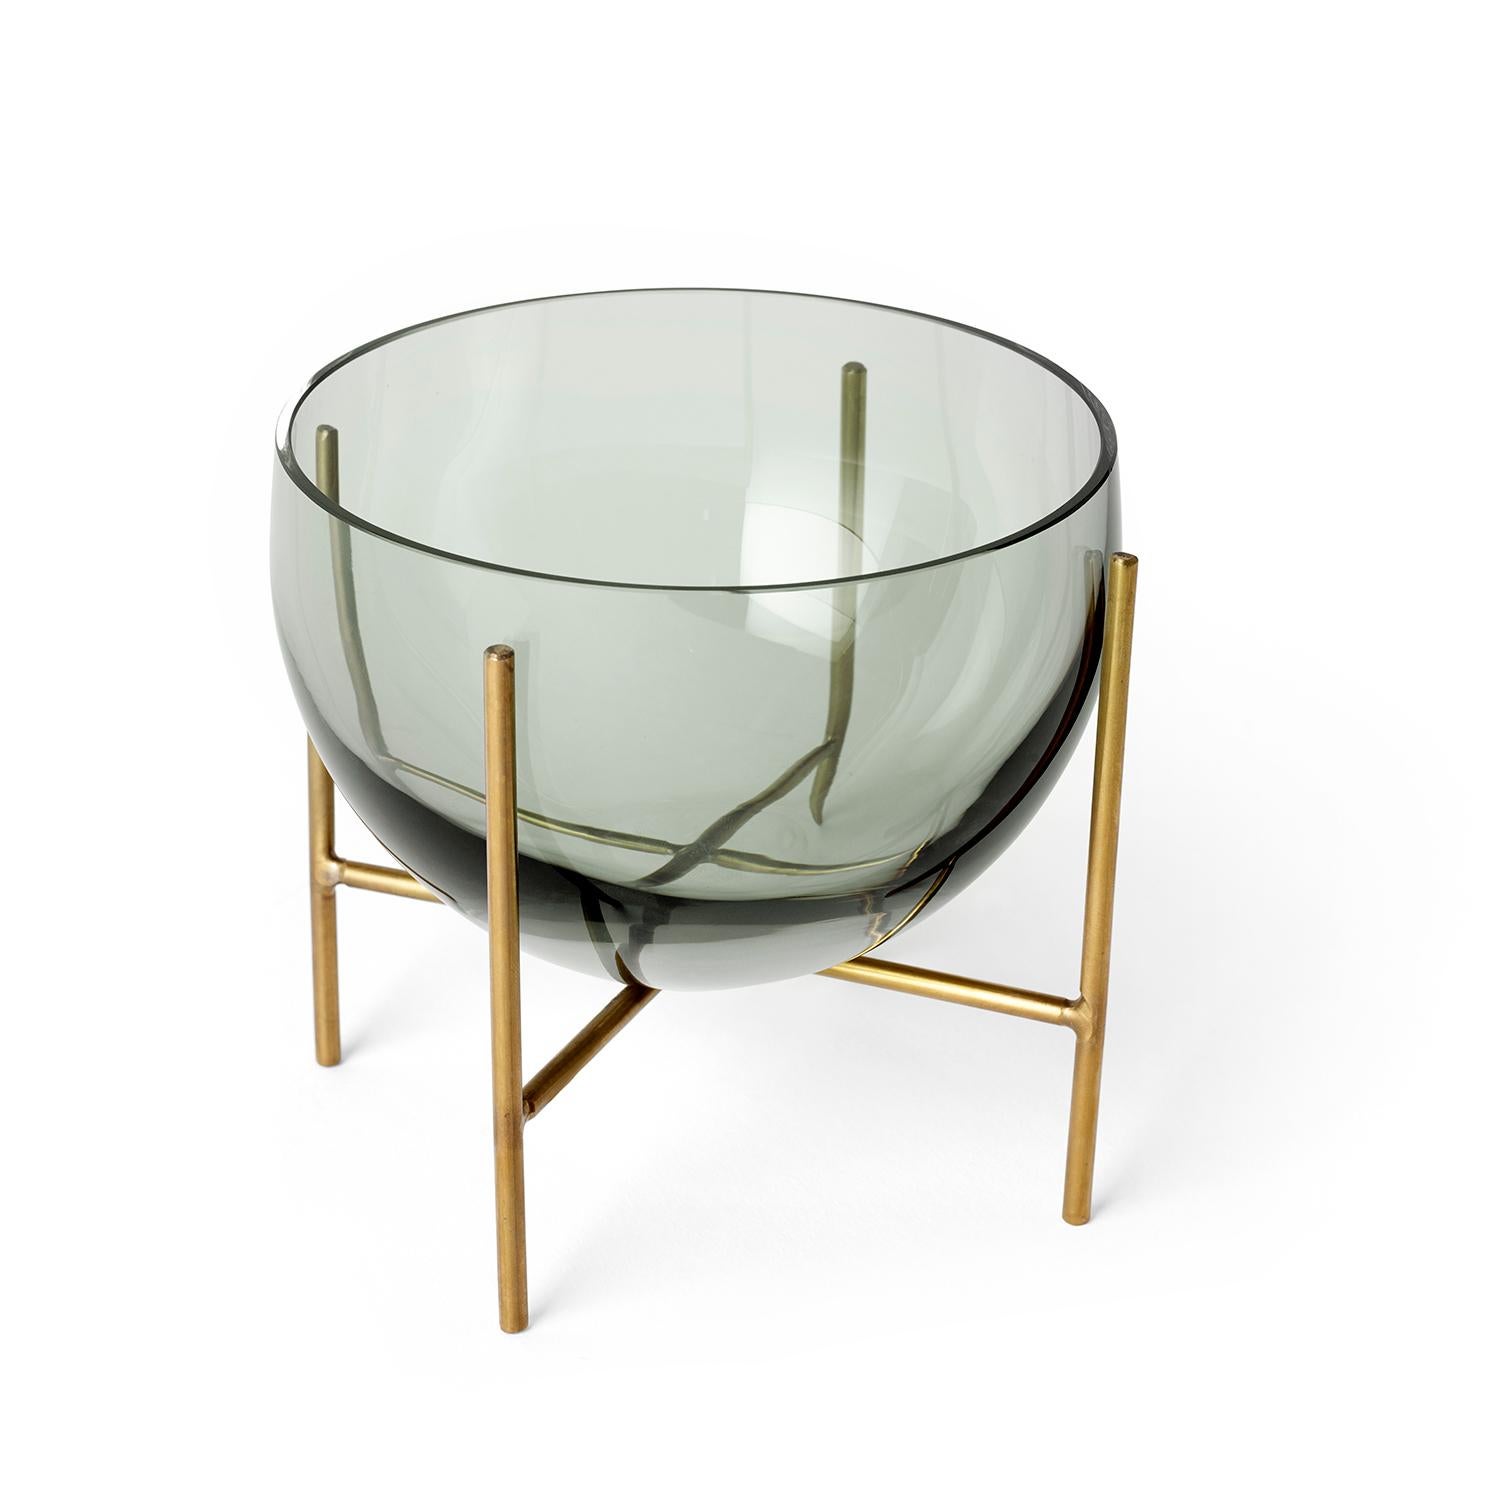 A new addition to the Echasse series by Theresa Arns for Menu, Echasse bowl combines the elegance of a traditional glass bowl with a playful and light expression, created by four slender brass legs that elevate it into the air. The word échasse is